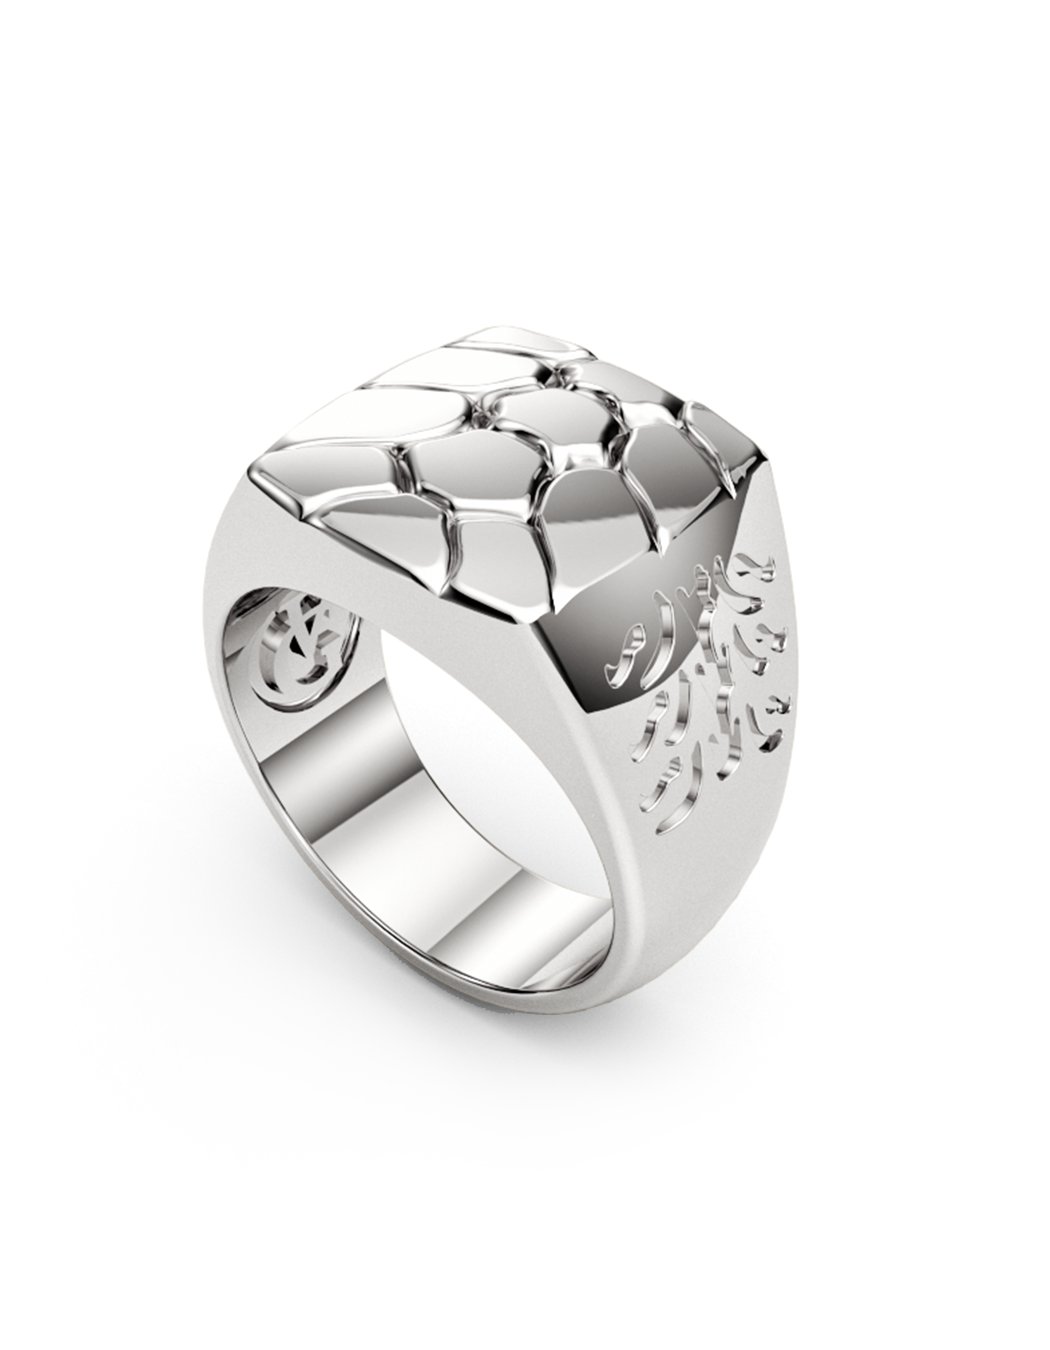 Sterling Silver Turtle Ring with Moving Arms and Legs Size 5